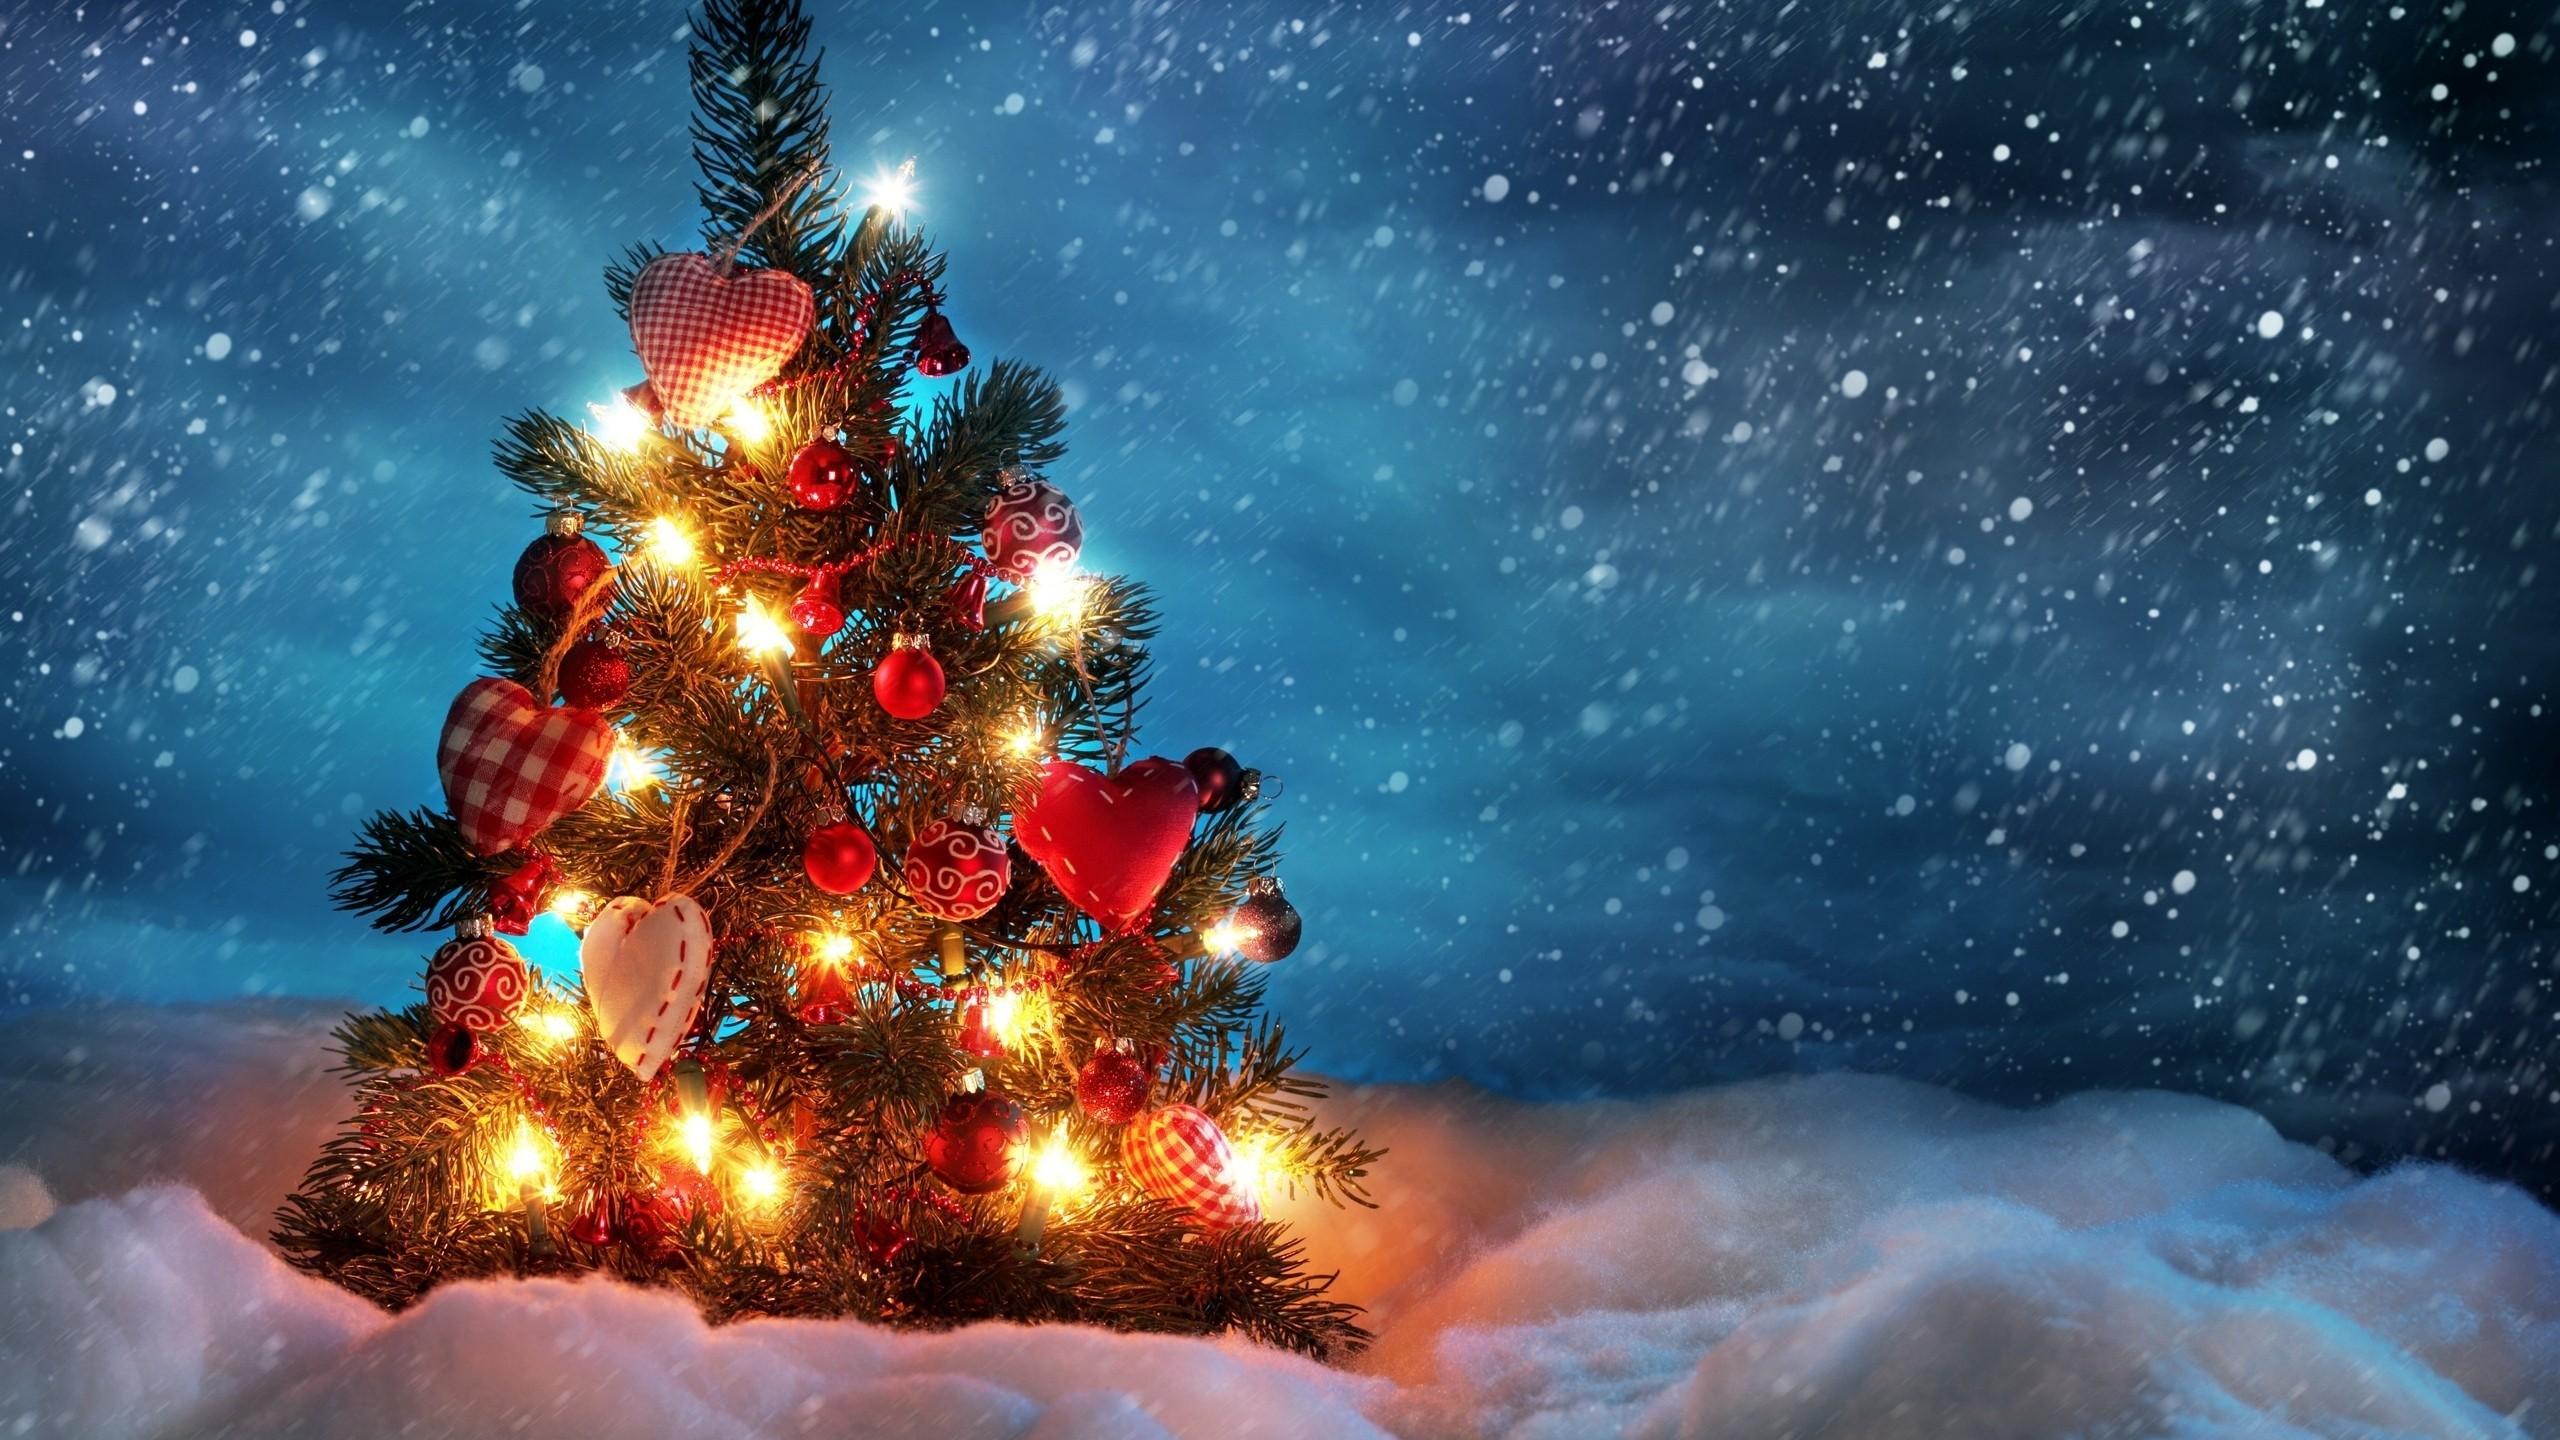 Download 2560x1440 Christmas Tree, Lights, Snow, Winter Wallpaper for iMac 27 inch